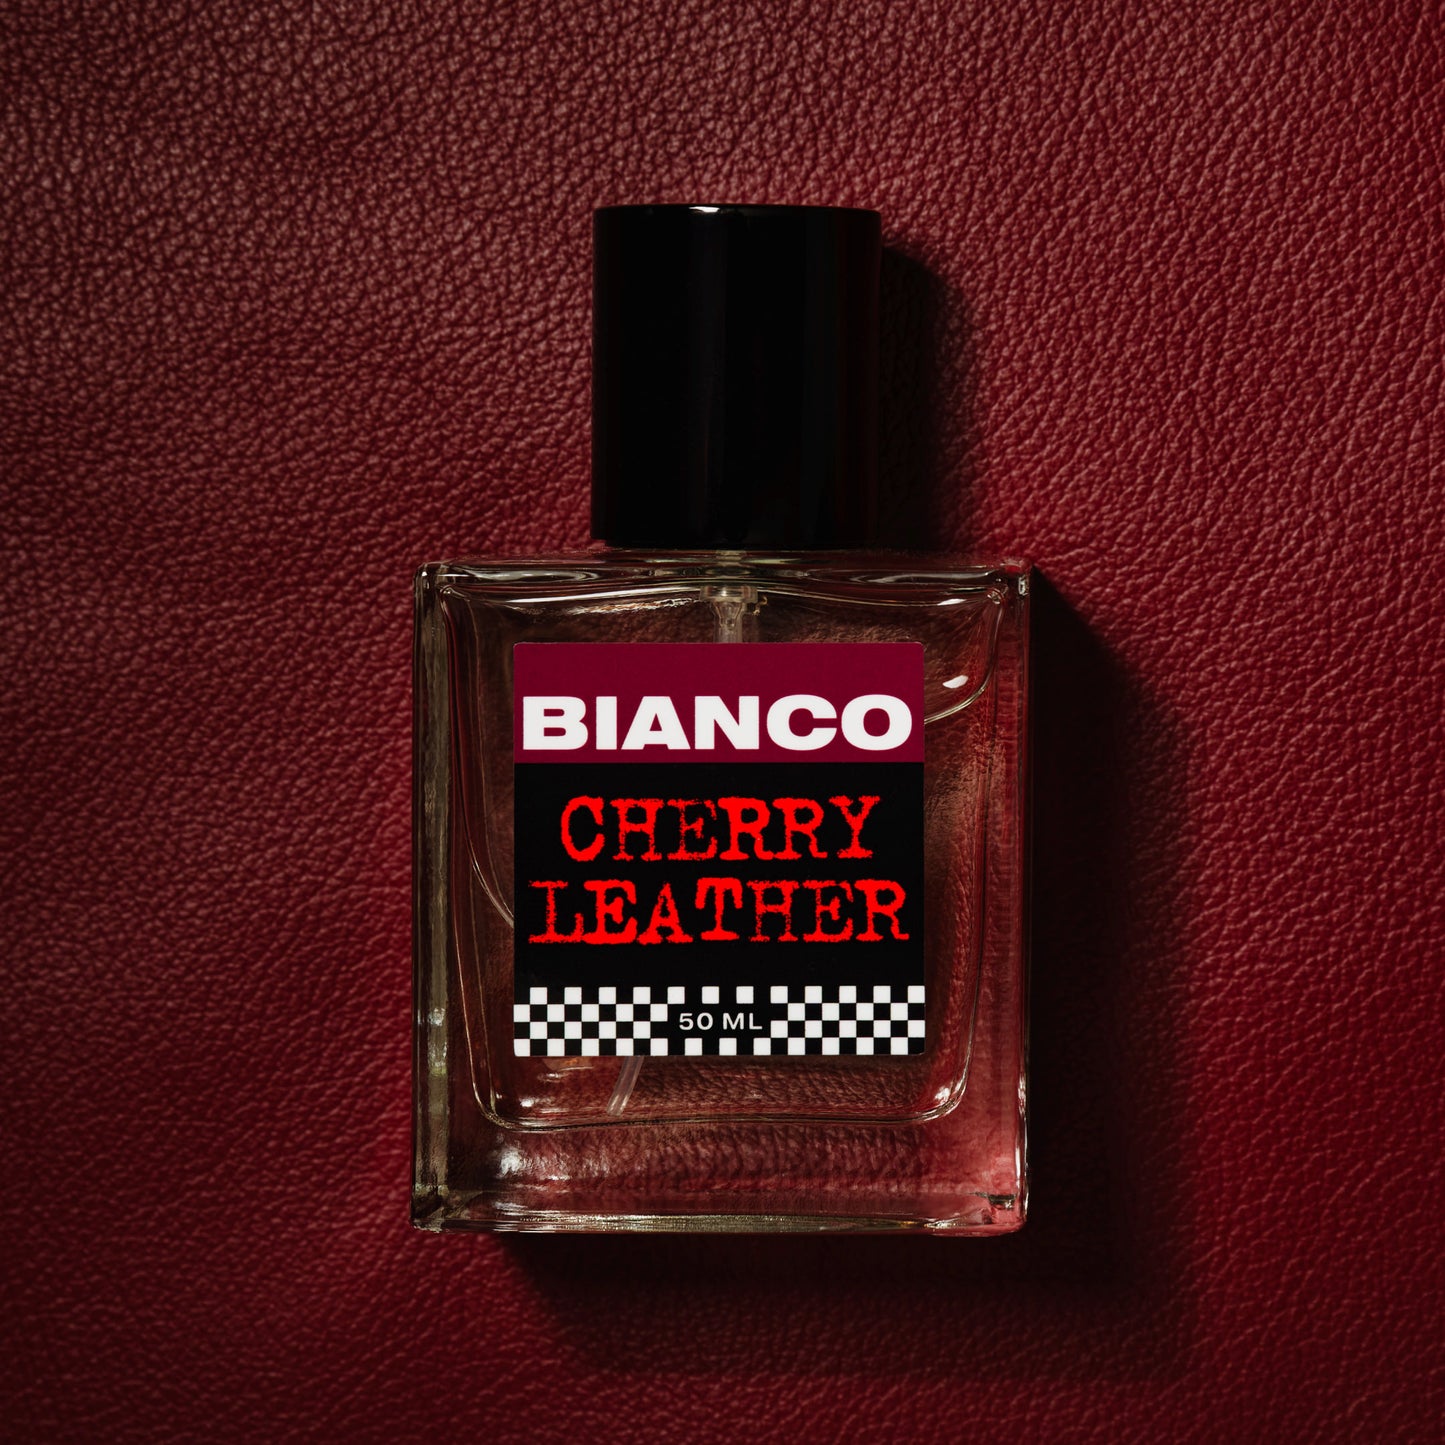 Bianco Profumo Cherry Leather with notes of Bitter Fennel, Star Anise, Black Pepper, Saffron, Ambrette Seed, Cherry, Bitter Almond, Guaiacwood, Pine Tar, Suede, Amber, Oakwood, Moss, and Musk. Bottle laid on top of a deep red piece of leather. 